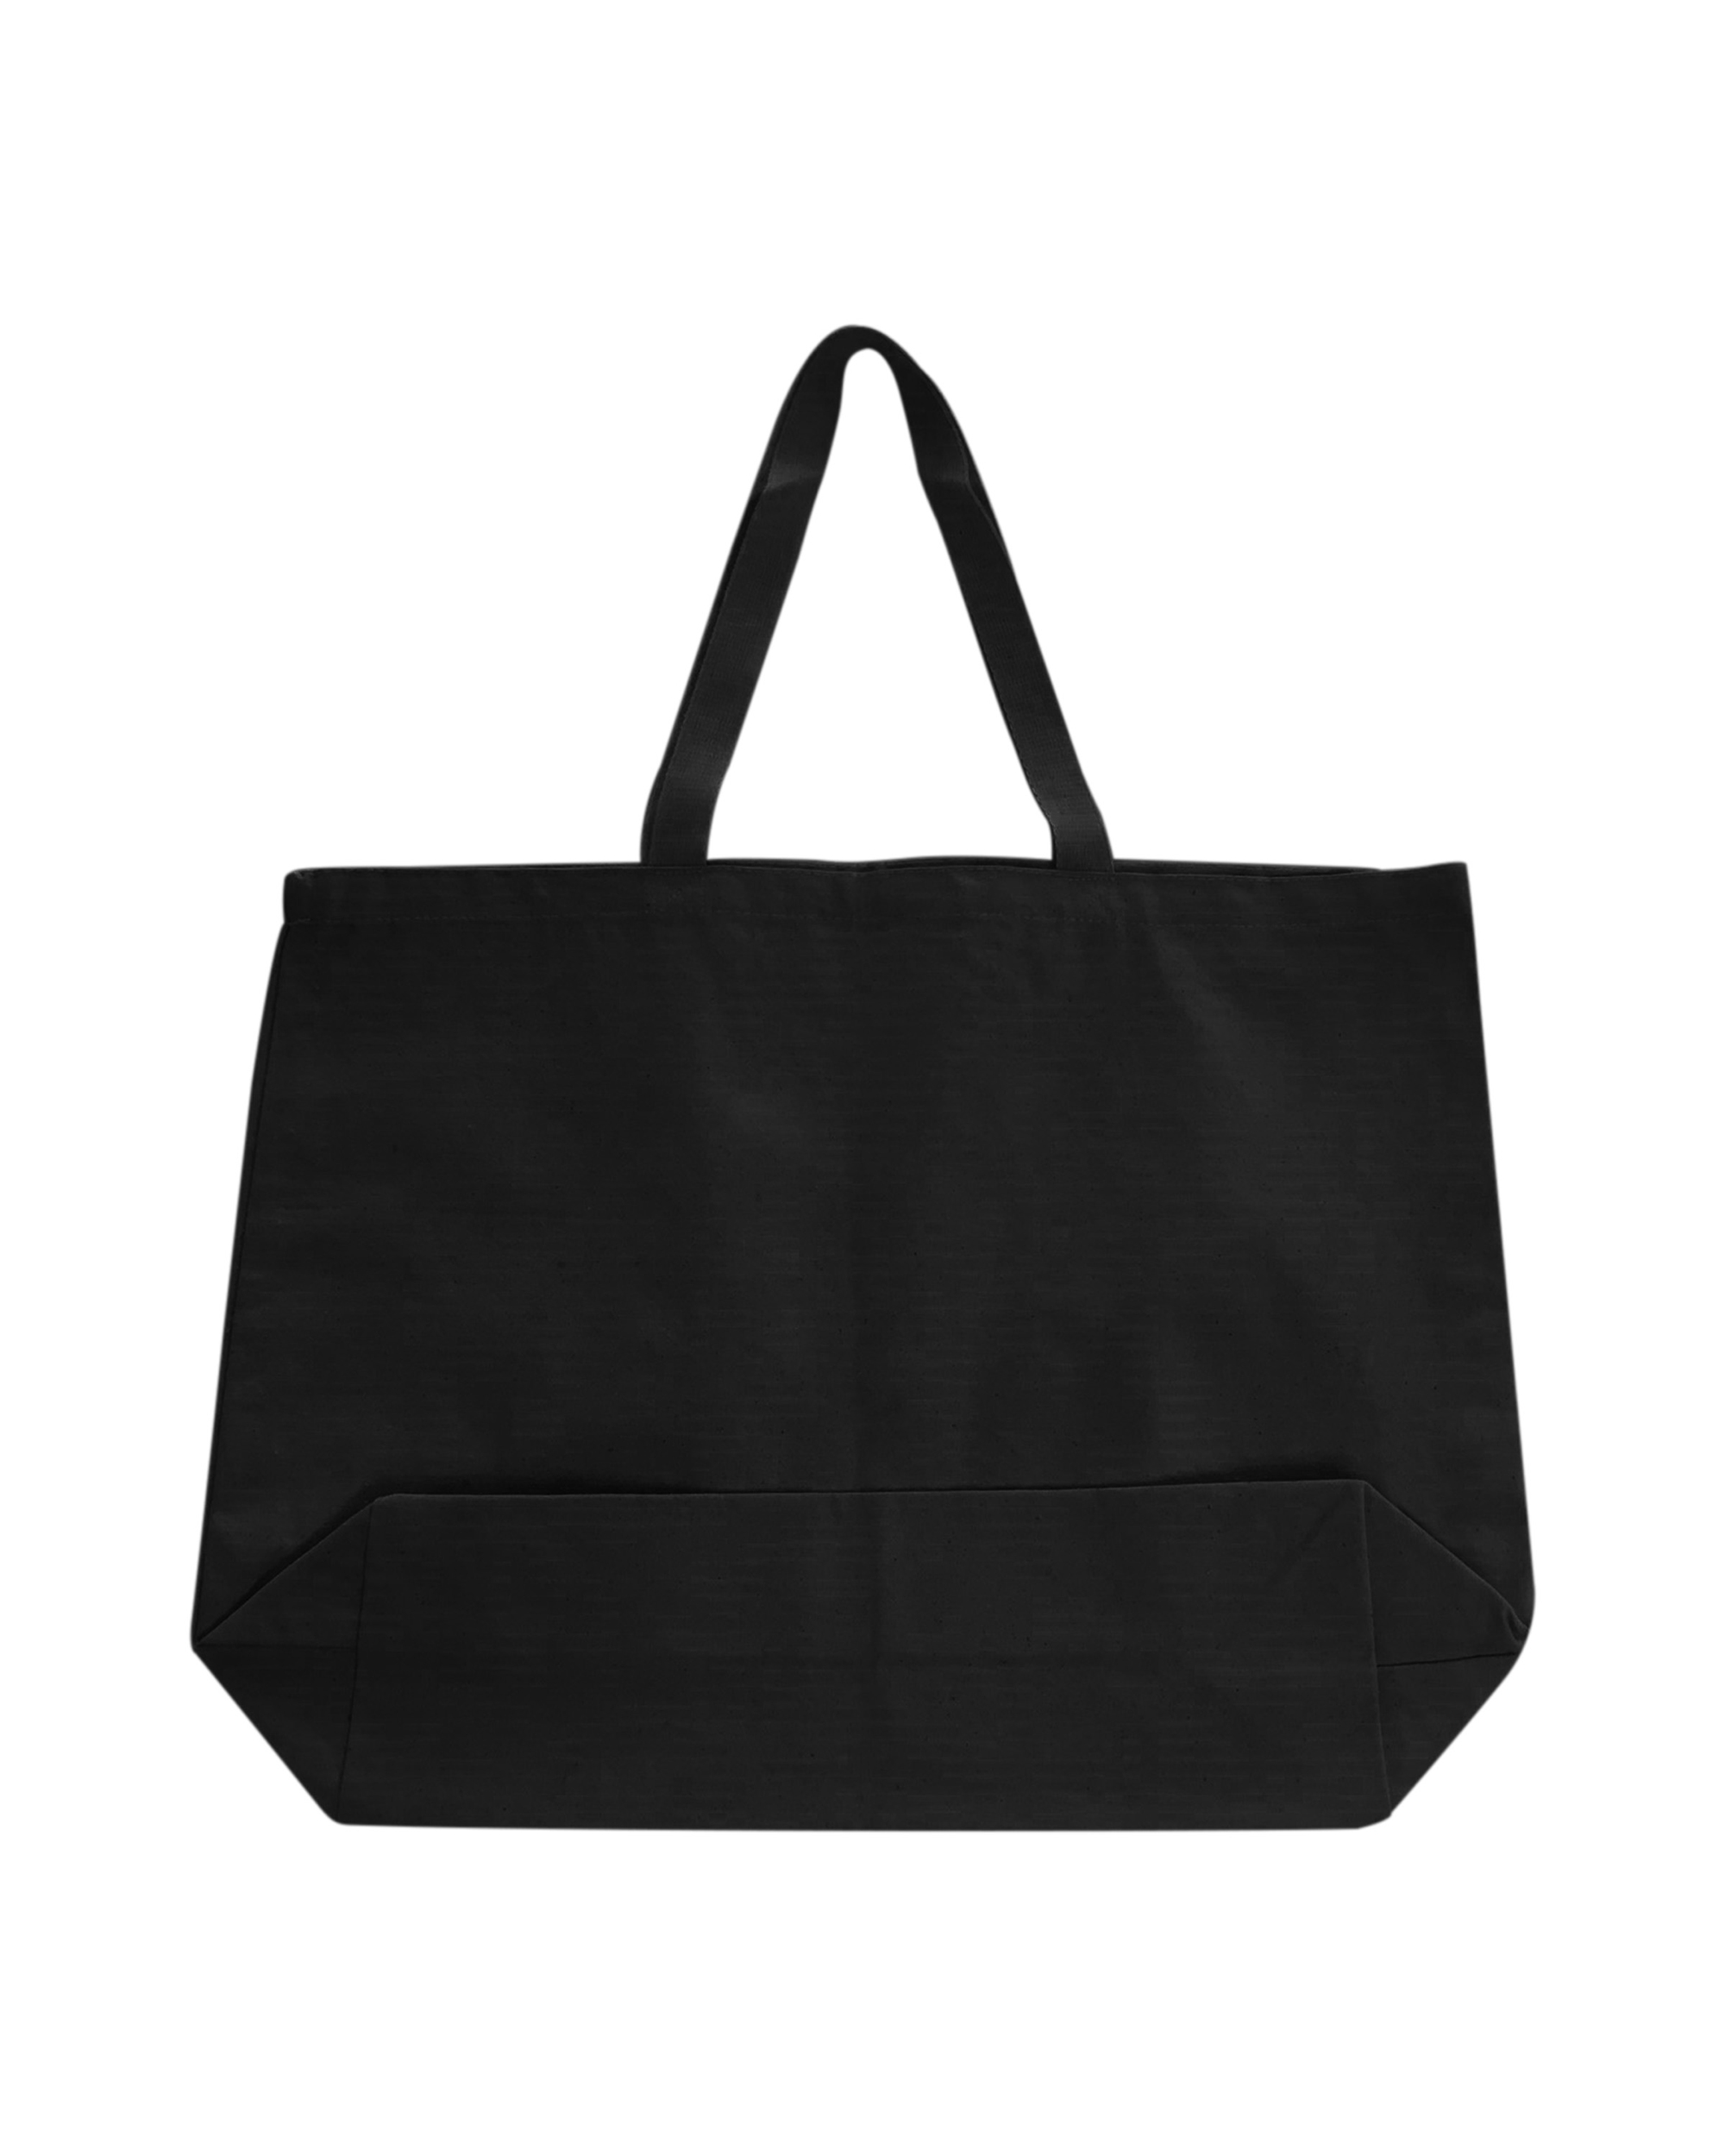 OAD® OAD108 Jumbo 12 oz Cotton Gusseted Tote